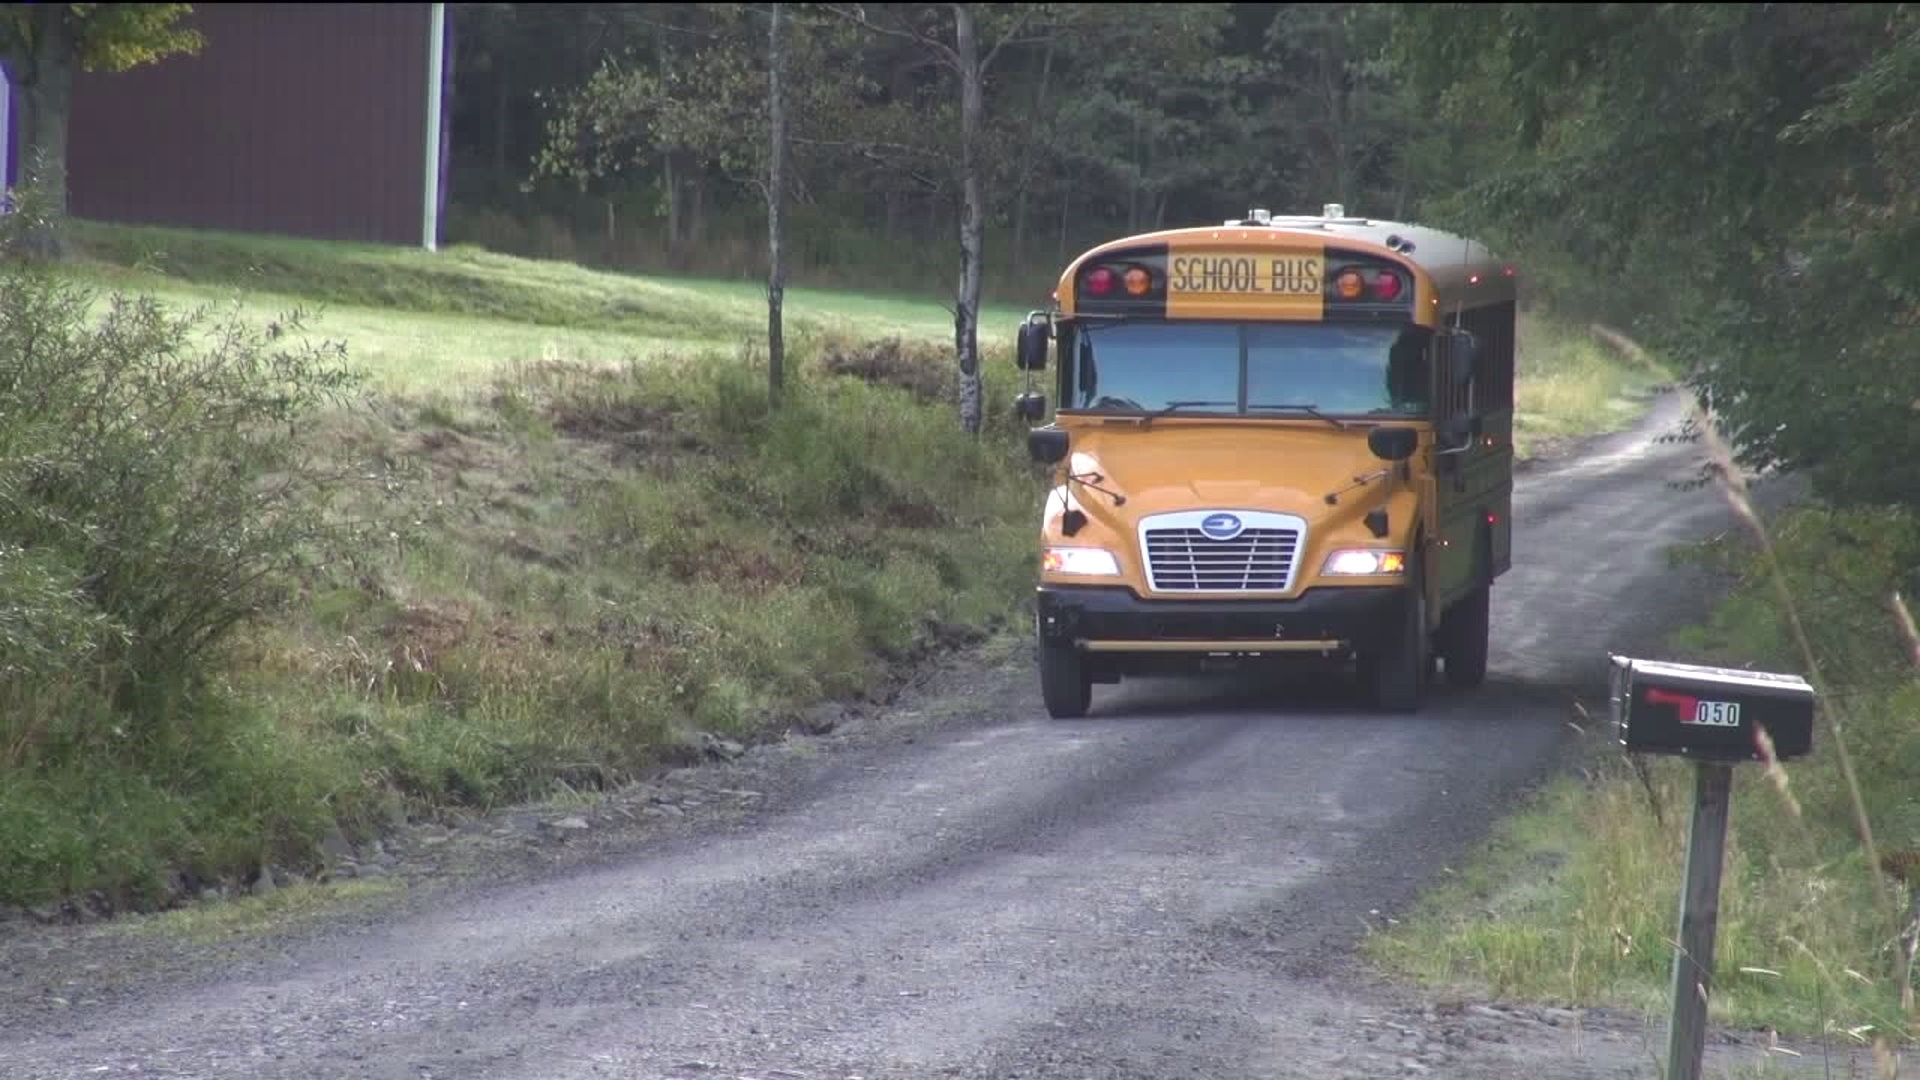 Rough Ride: Have Roads in Susquehanna County Been Improved?